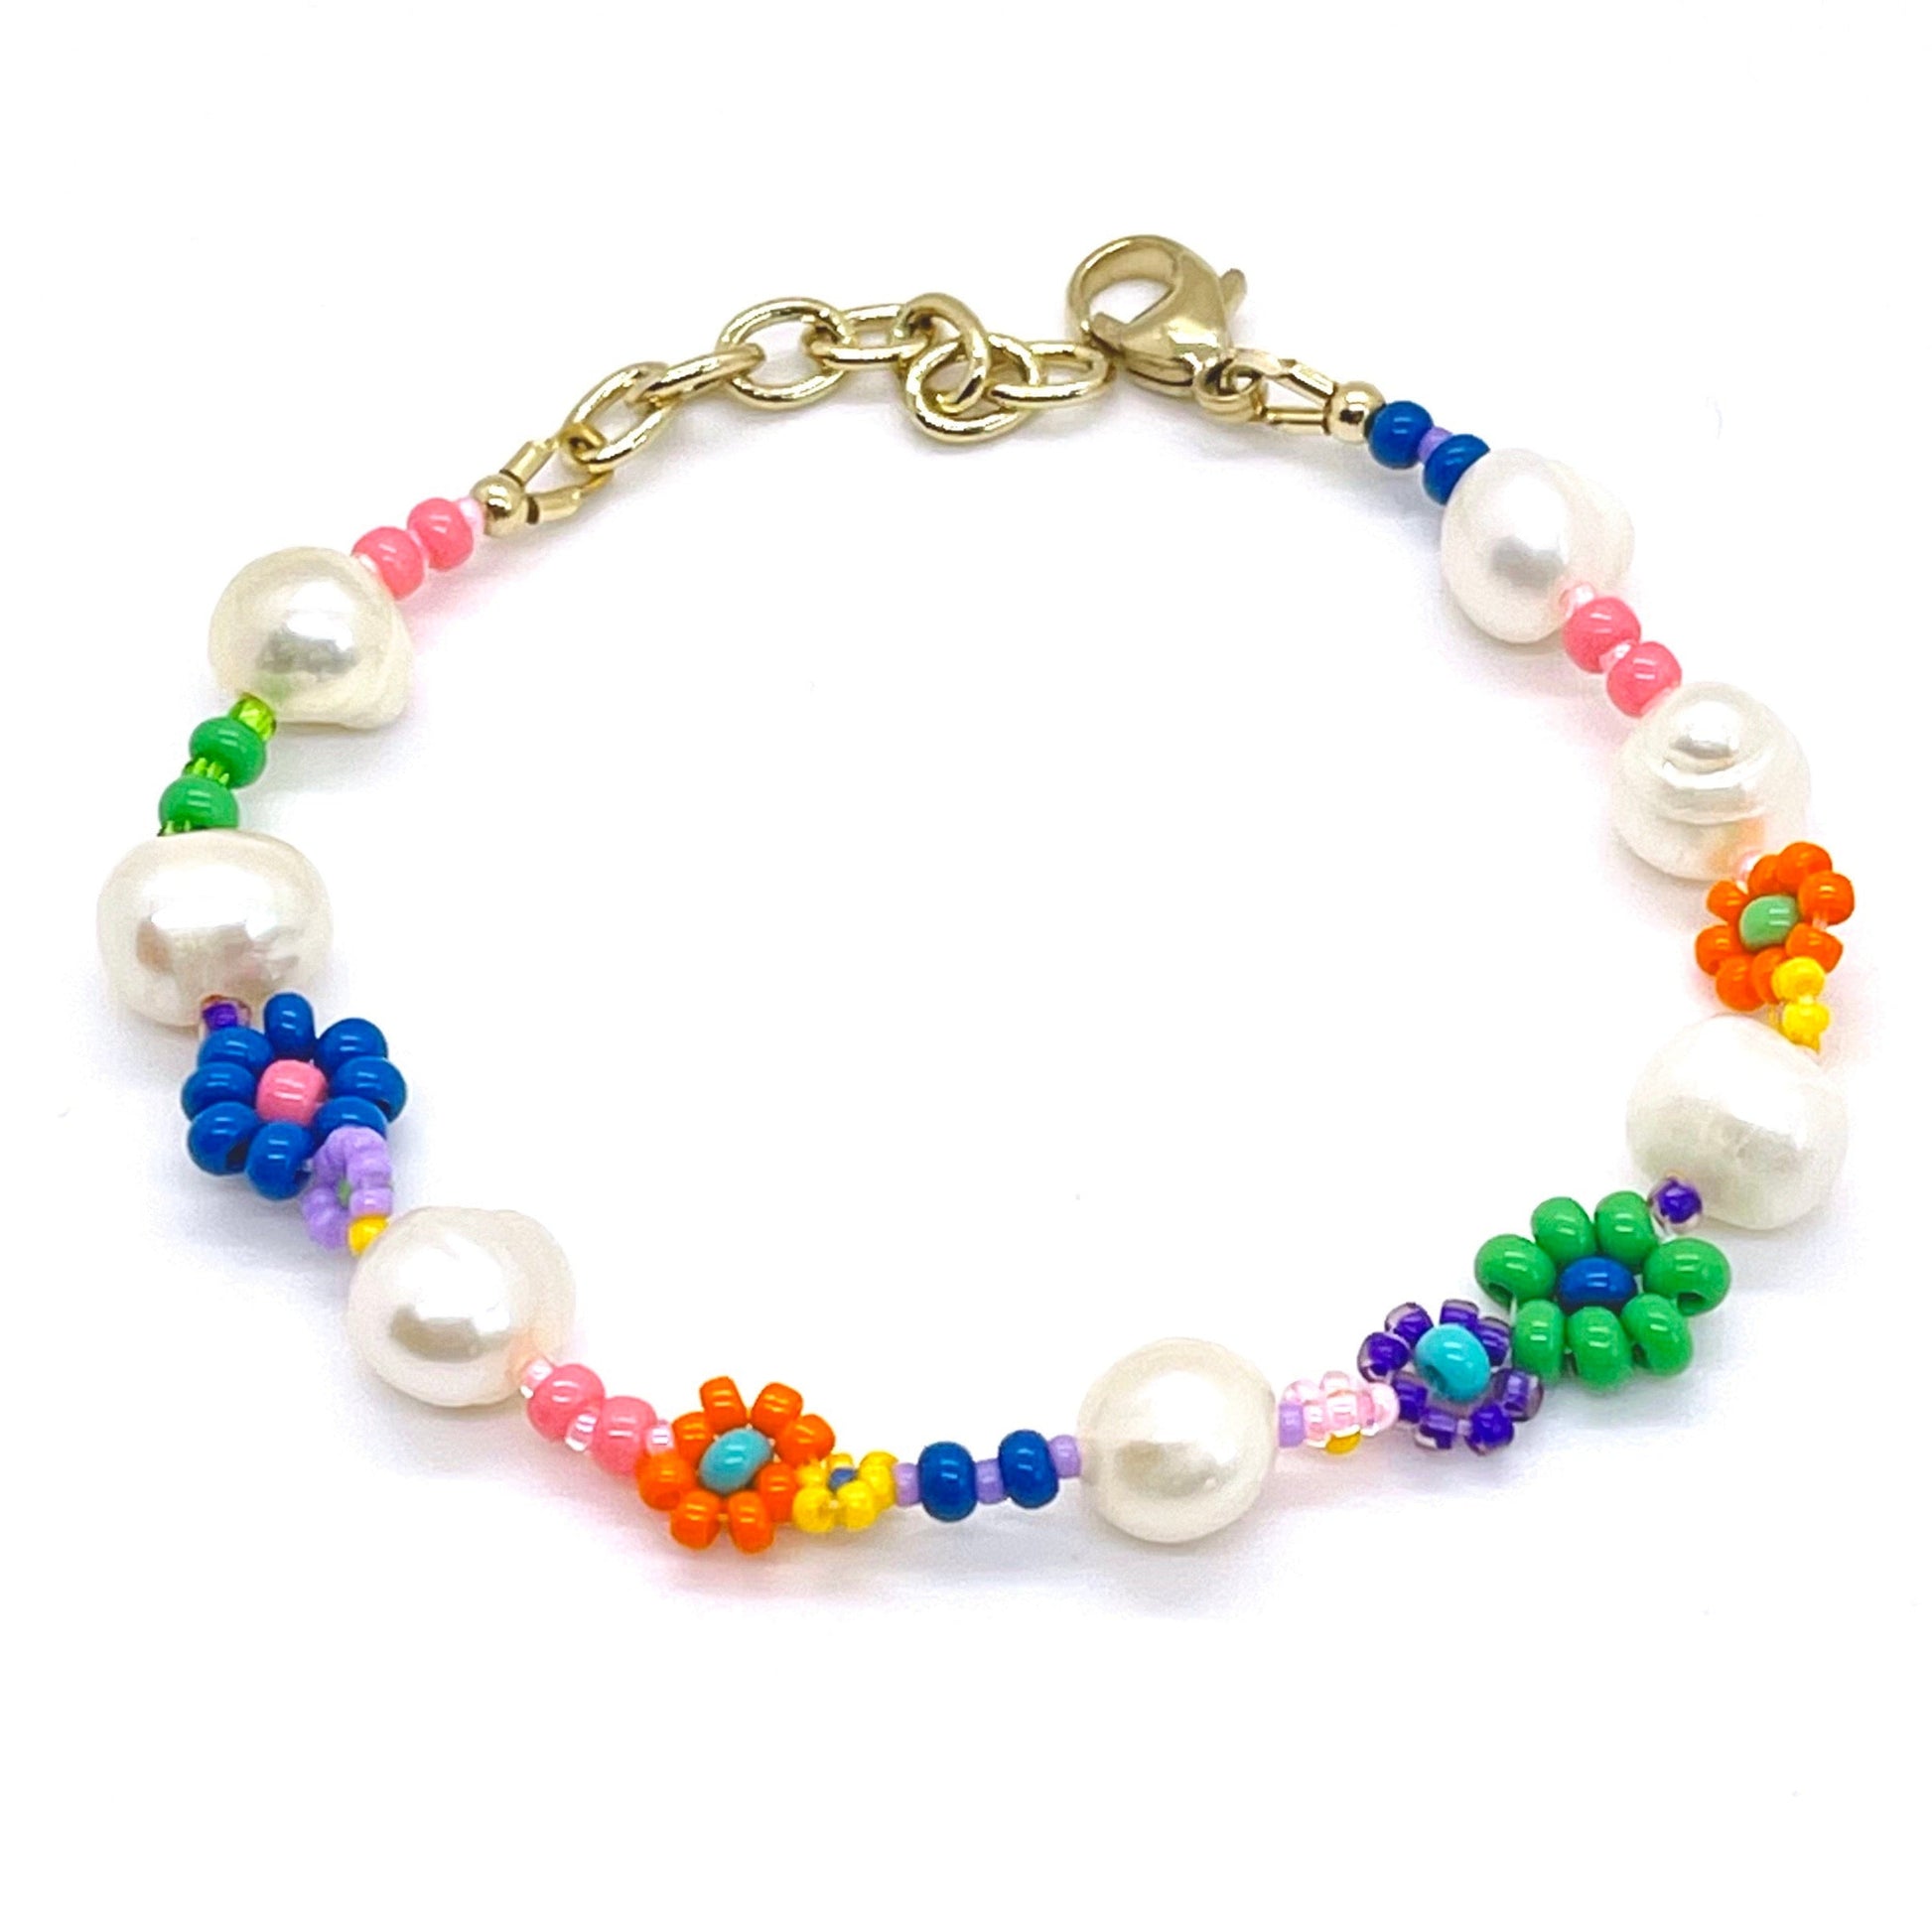 Daisy bead bracelet with freshwater pearls and bright colorful seed beads.